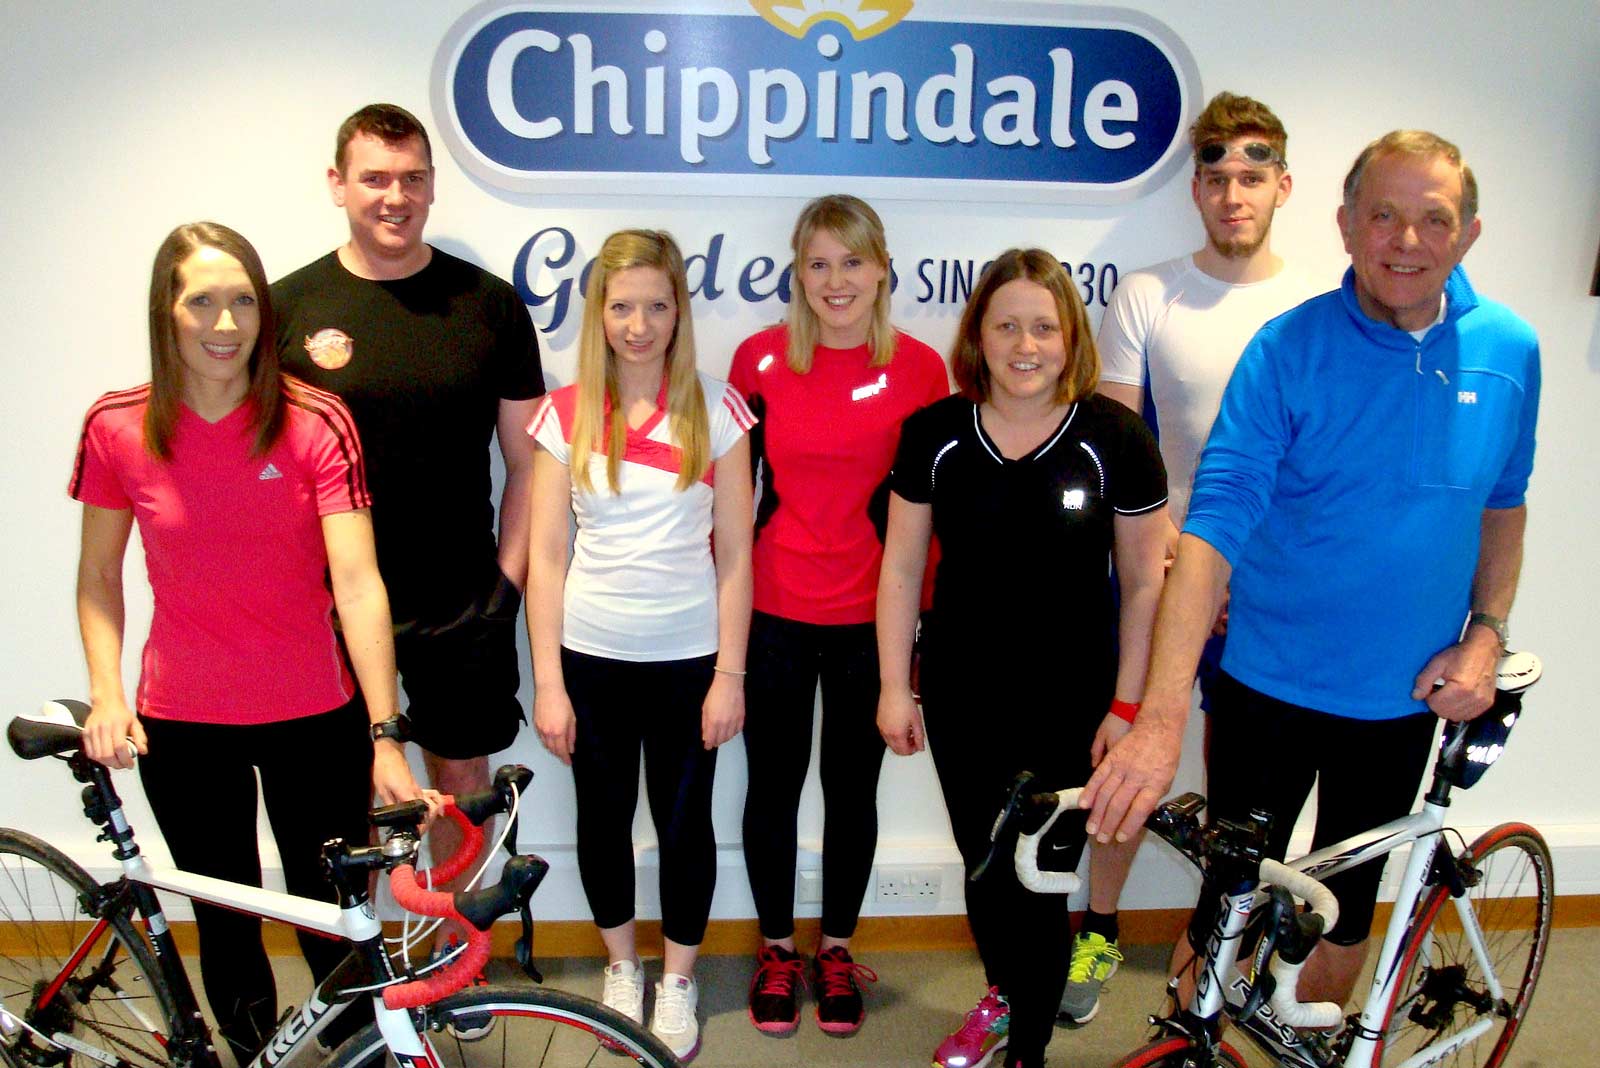 Team Chippindale